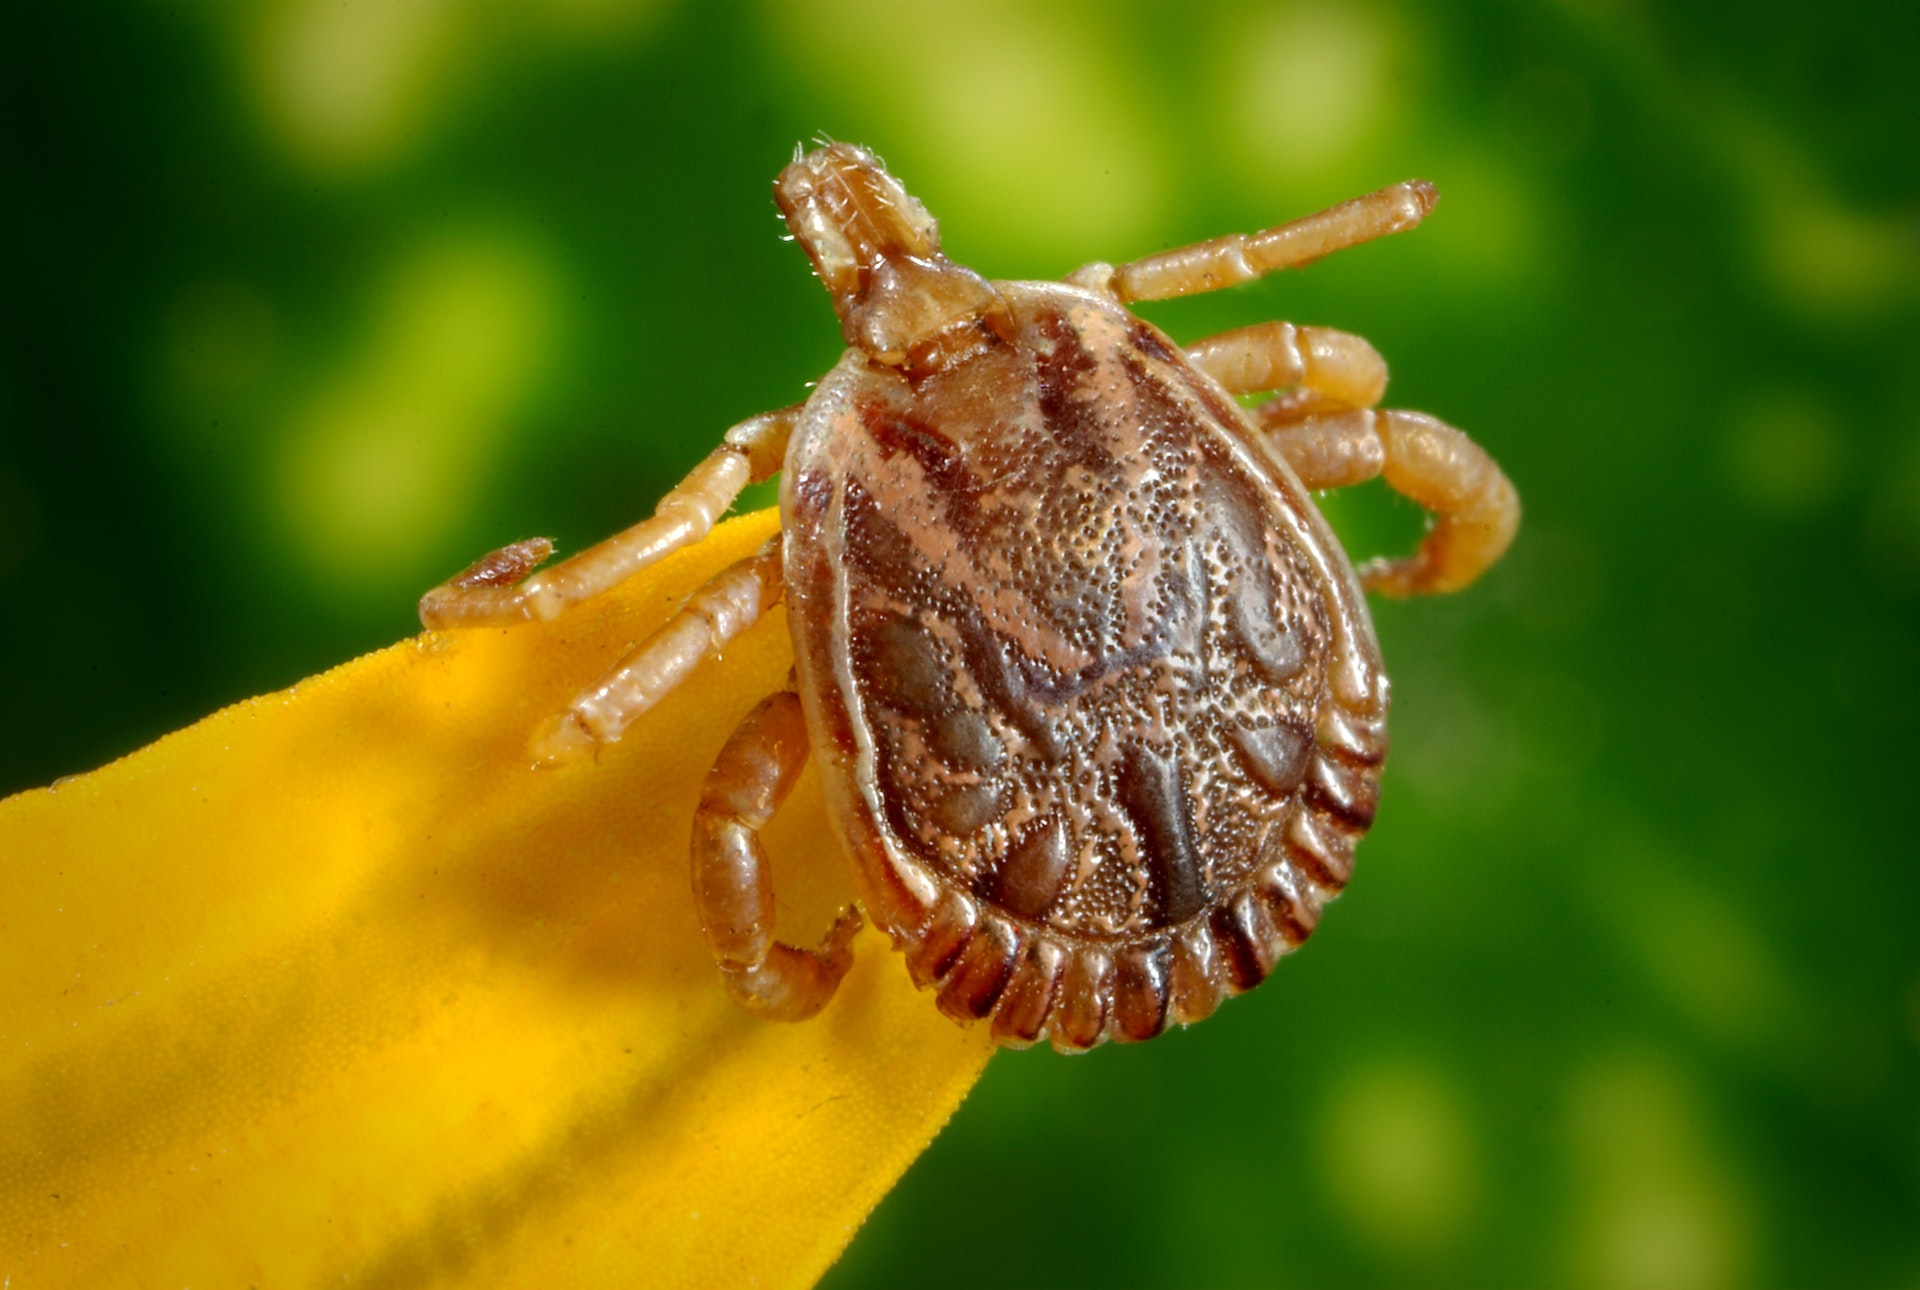 7 Useful Tips to Save Yourself From Tick Bites